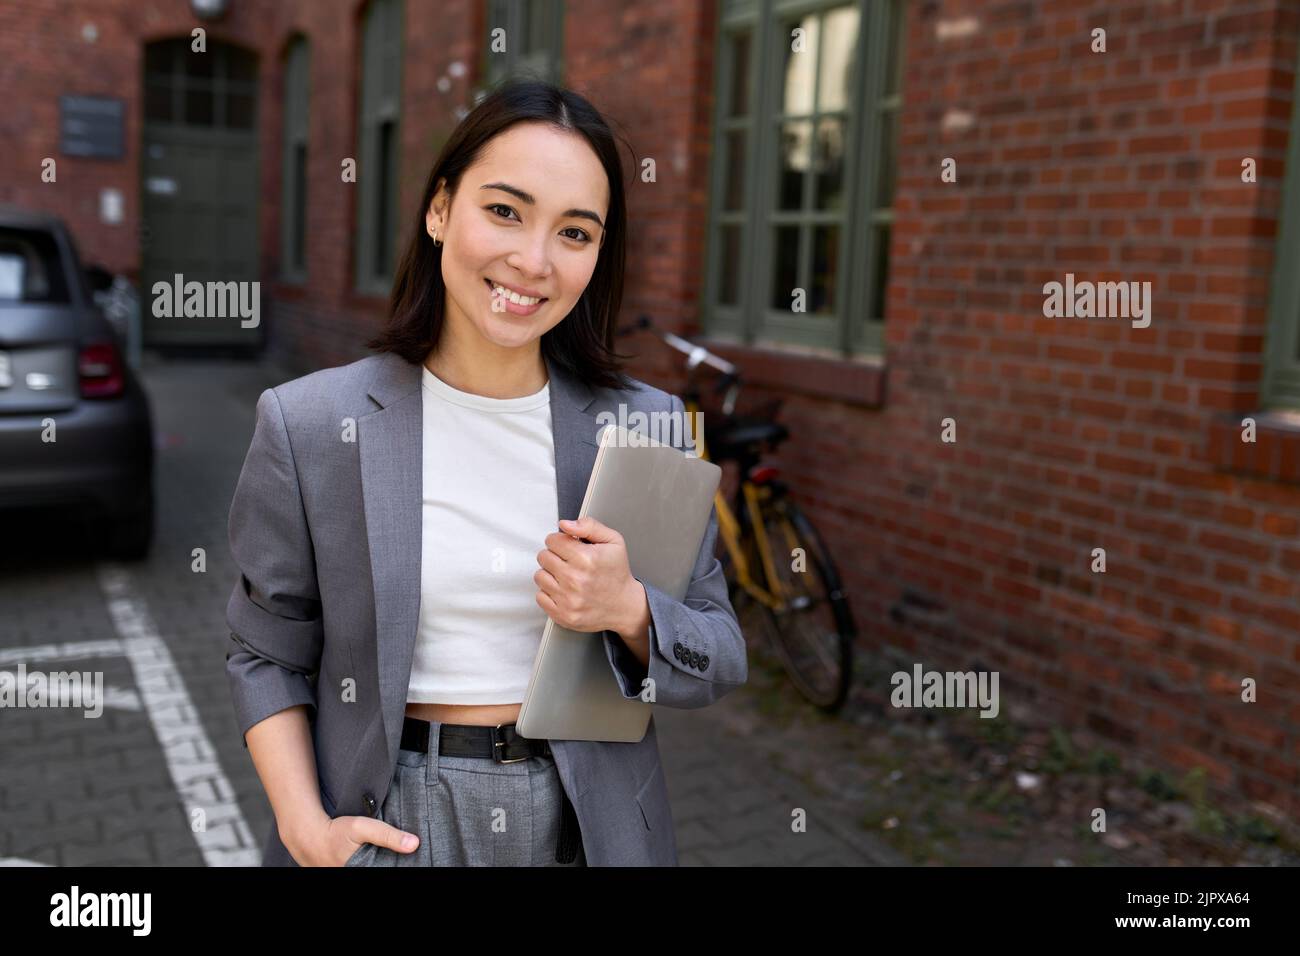 Young professional leader Asian business woman wearing suit, outdoor portrait. Stock Photo